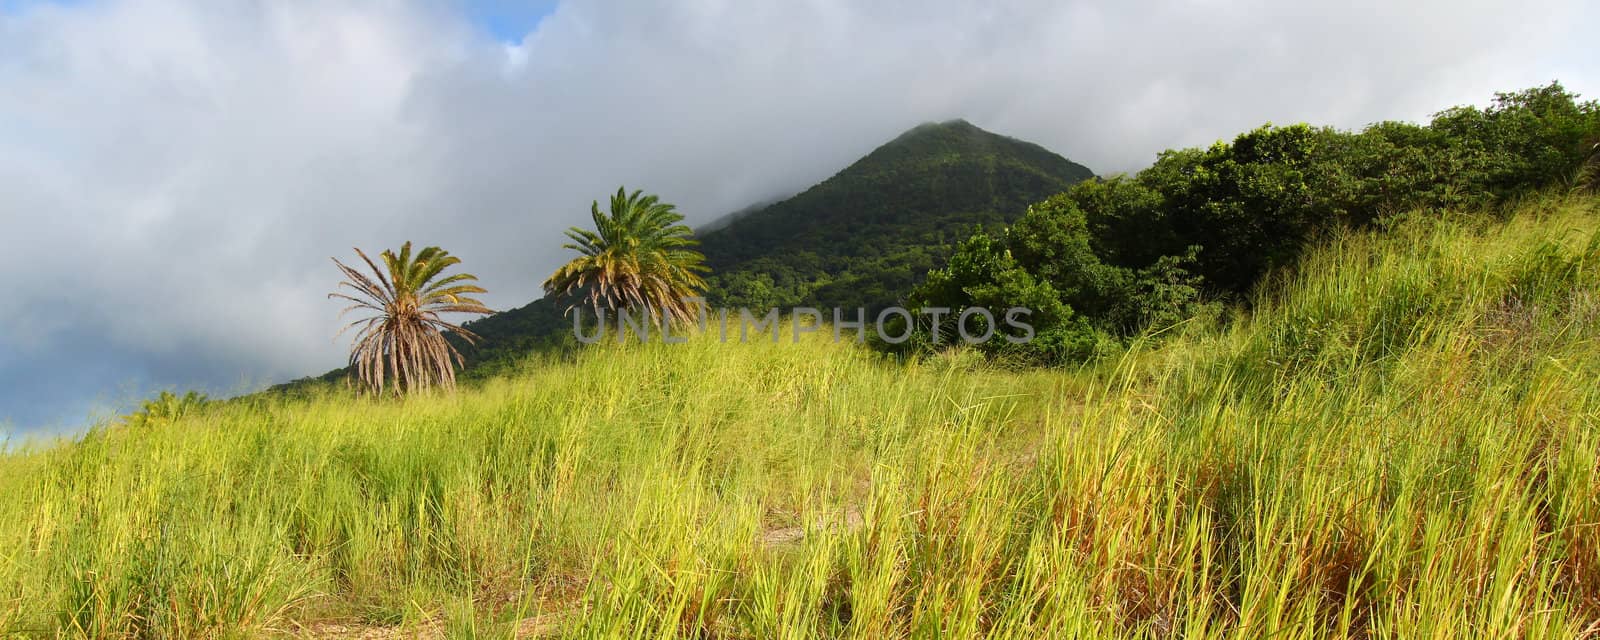 Mount Liamuiga in Saint Kitts by Wirepec